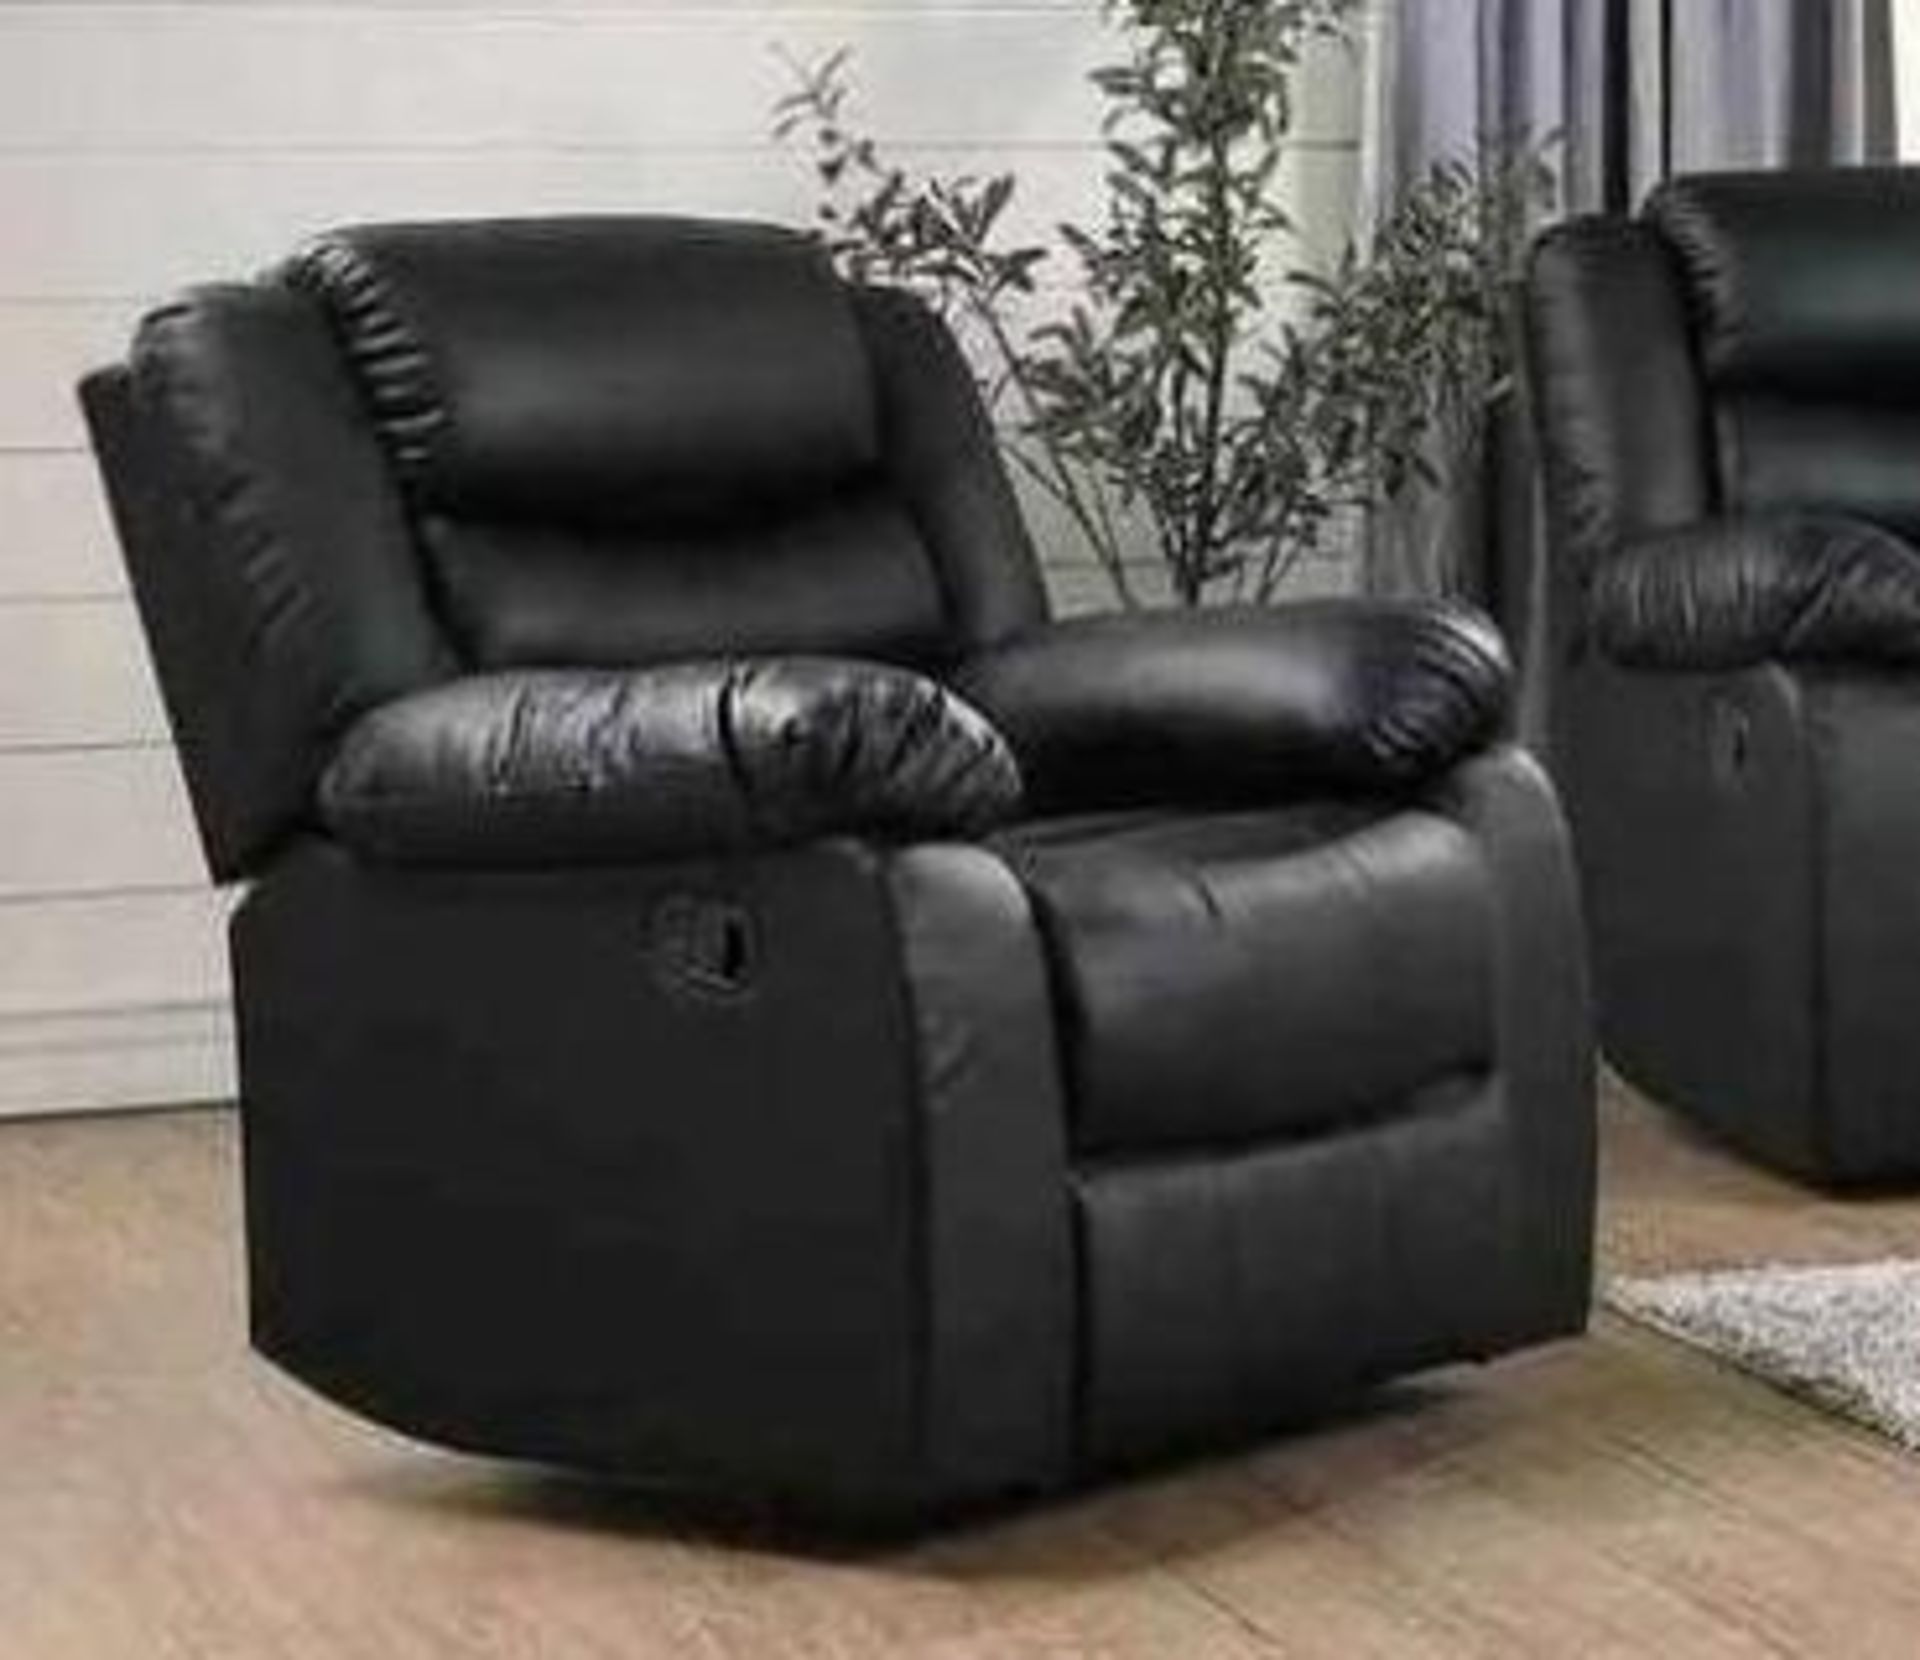 BRAND NEW & BOXED Malaga leather single seater manual recliner armchair in Black.